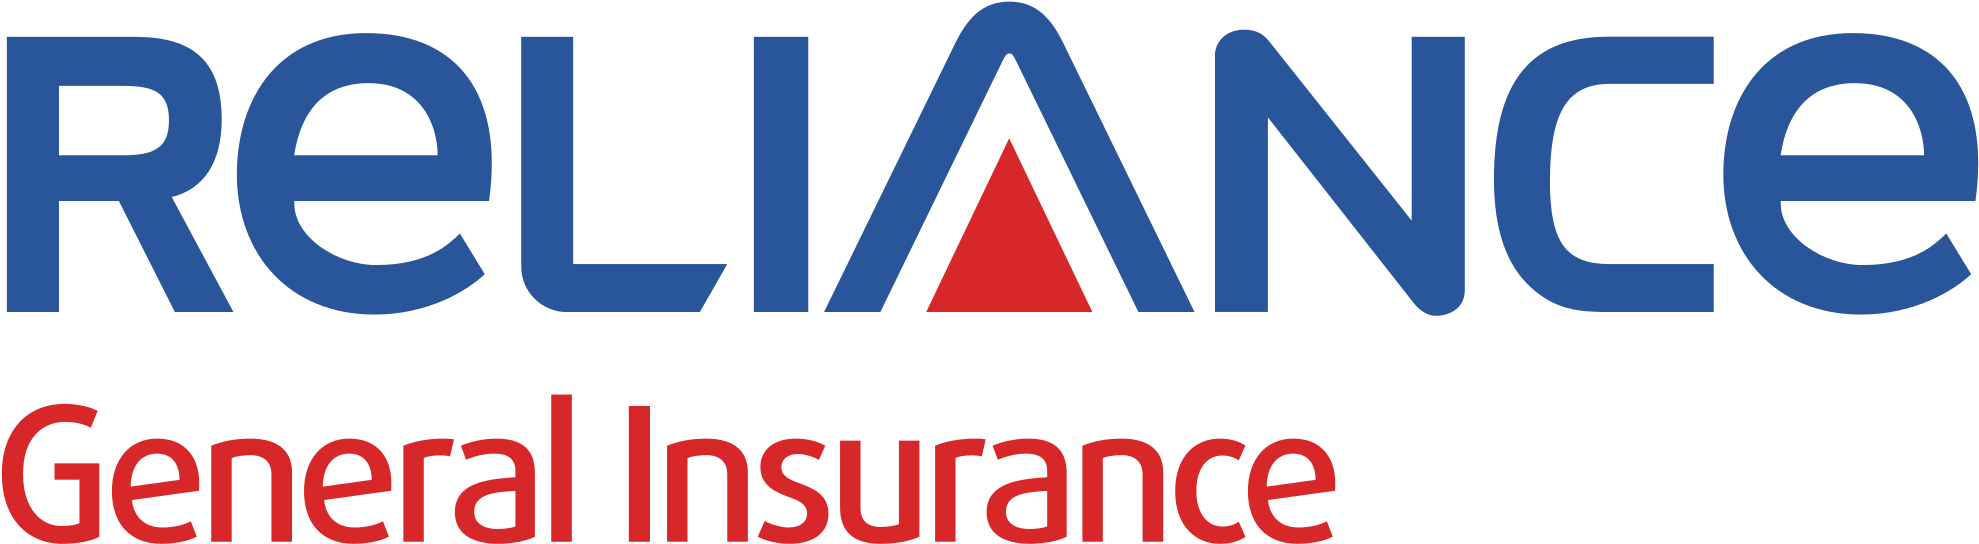 Download Tennessee Travel Insurance Companies Images Reliance Reliance Life Insurance Logo Png Image With No Background Pngkey Com